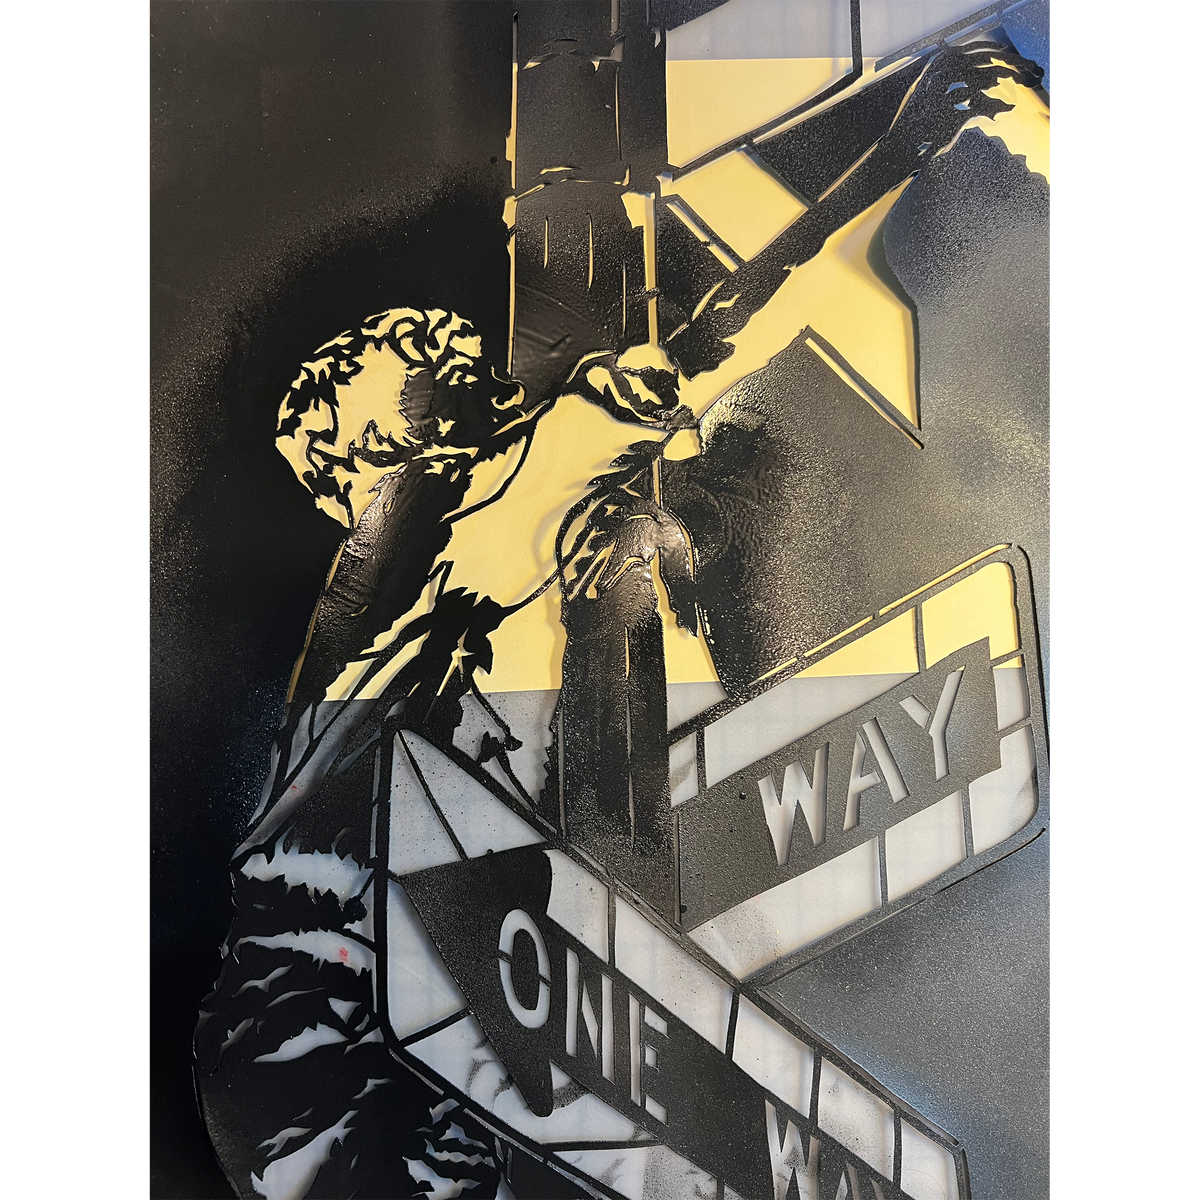 Chris Stain &quot;N. 9th and Pacific&quot; - Original Hand-Cut Dura-Lar Working Stencil - 30 x 40&quot;